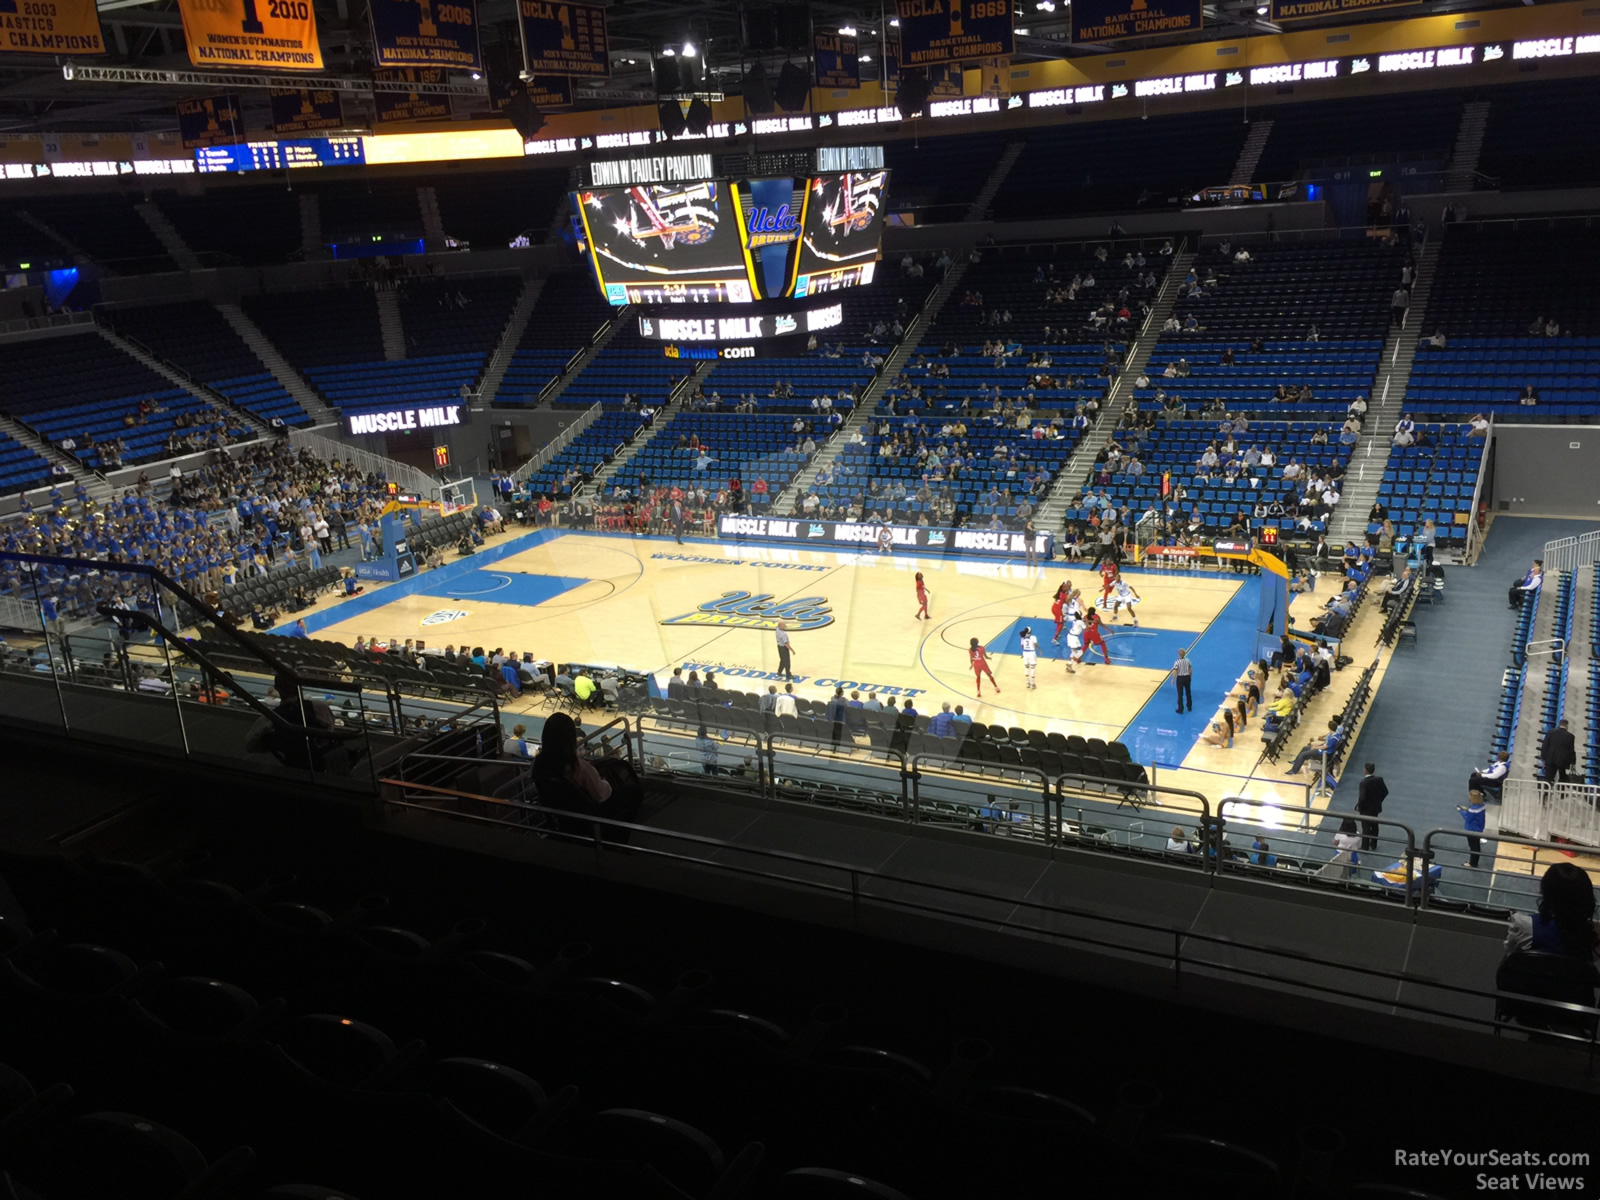 section 213, row 6 seat view  - pauley pavilion